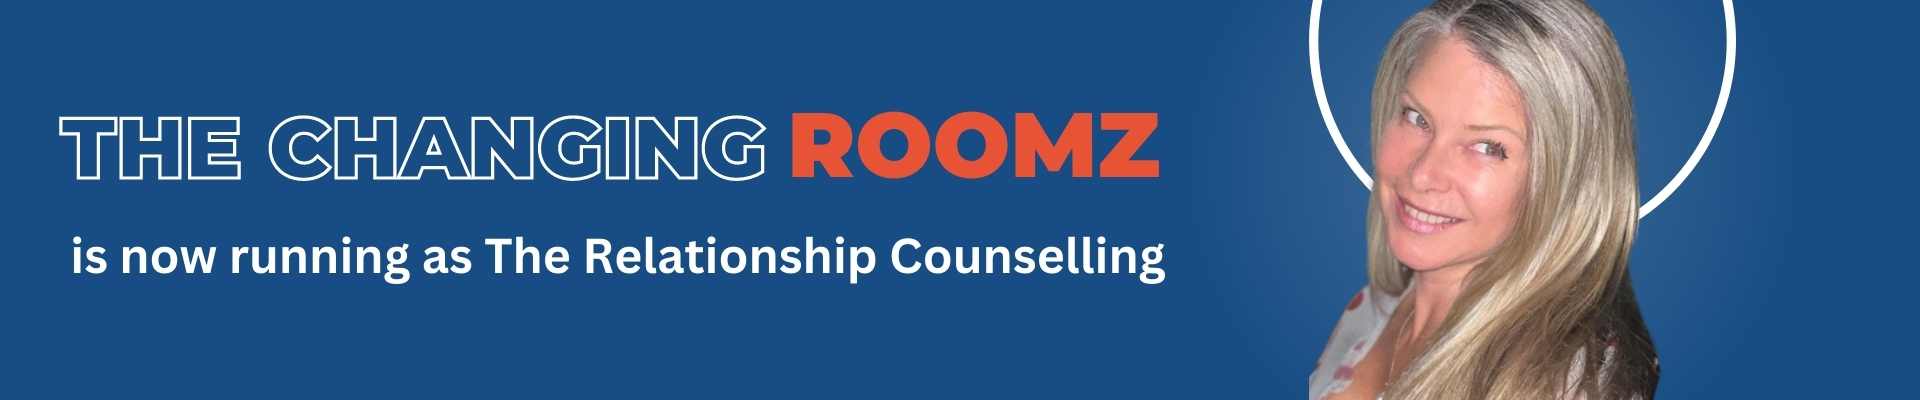 The Changing Roomz_Relationship Counseling